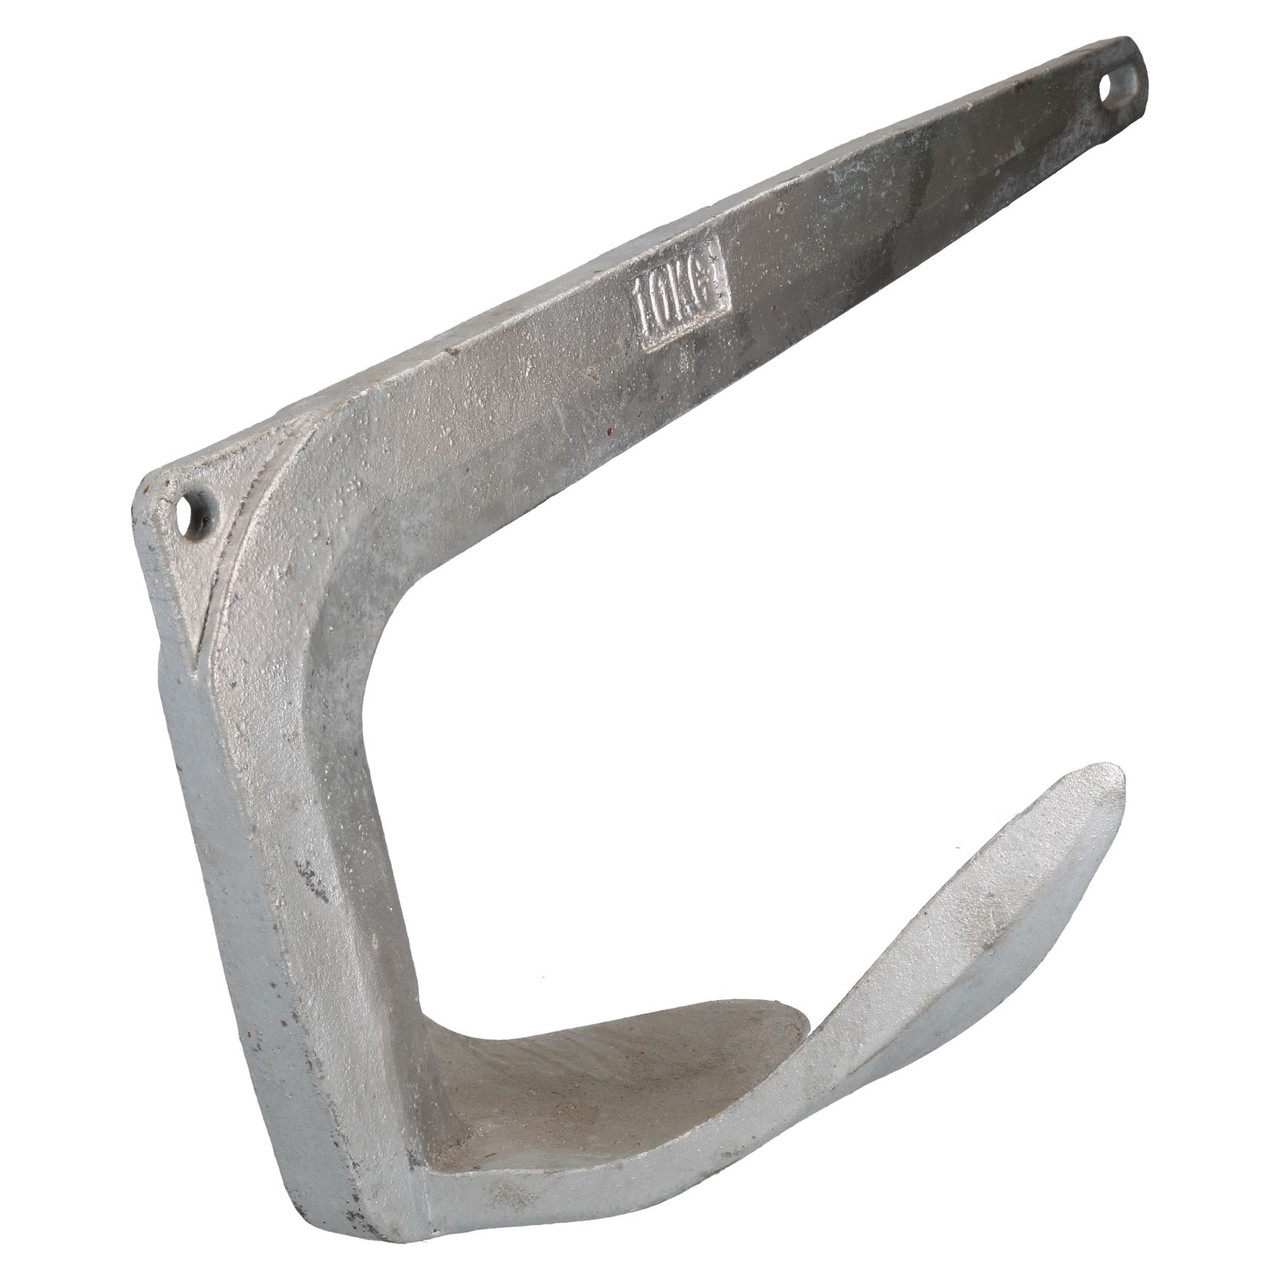 Trident Cruising Claw Anchor 10kg Galvanised for Large Boats / Yachts